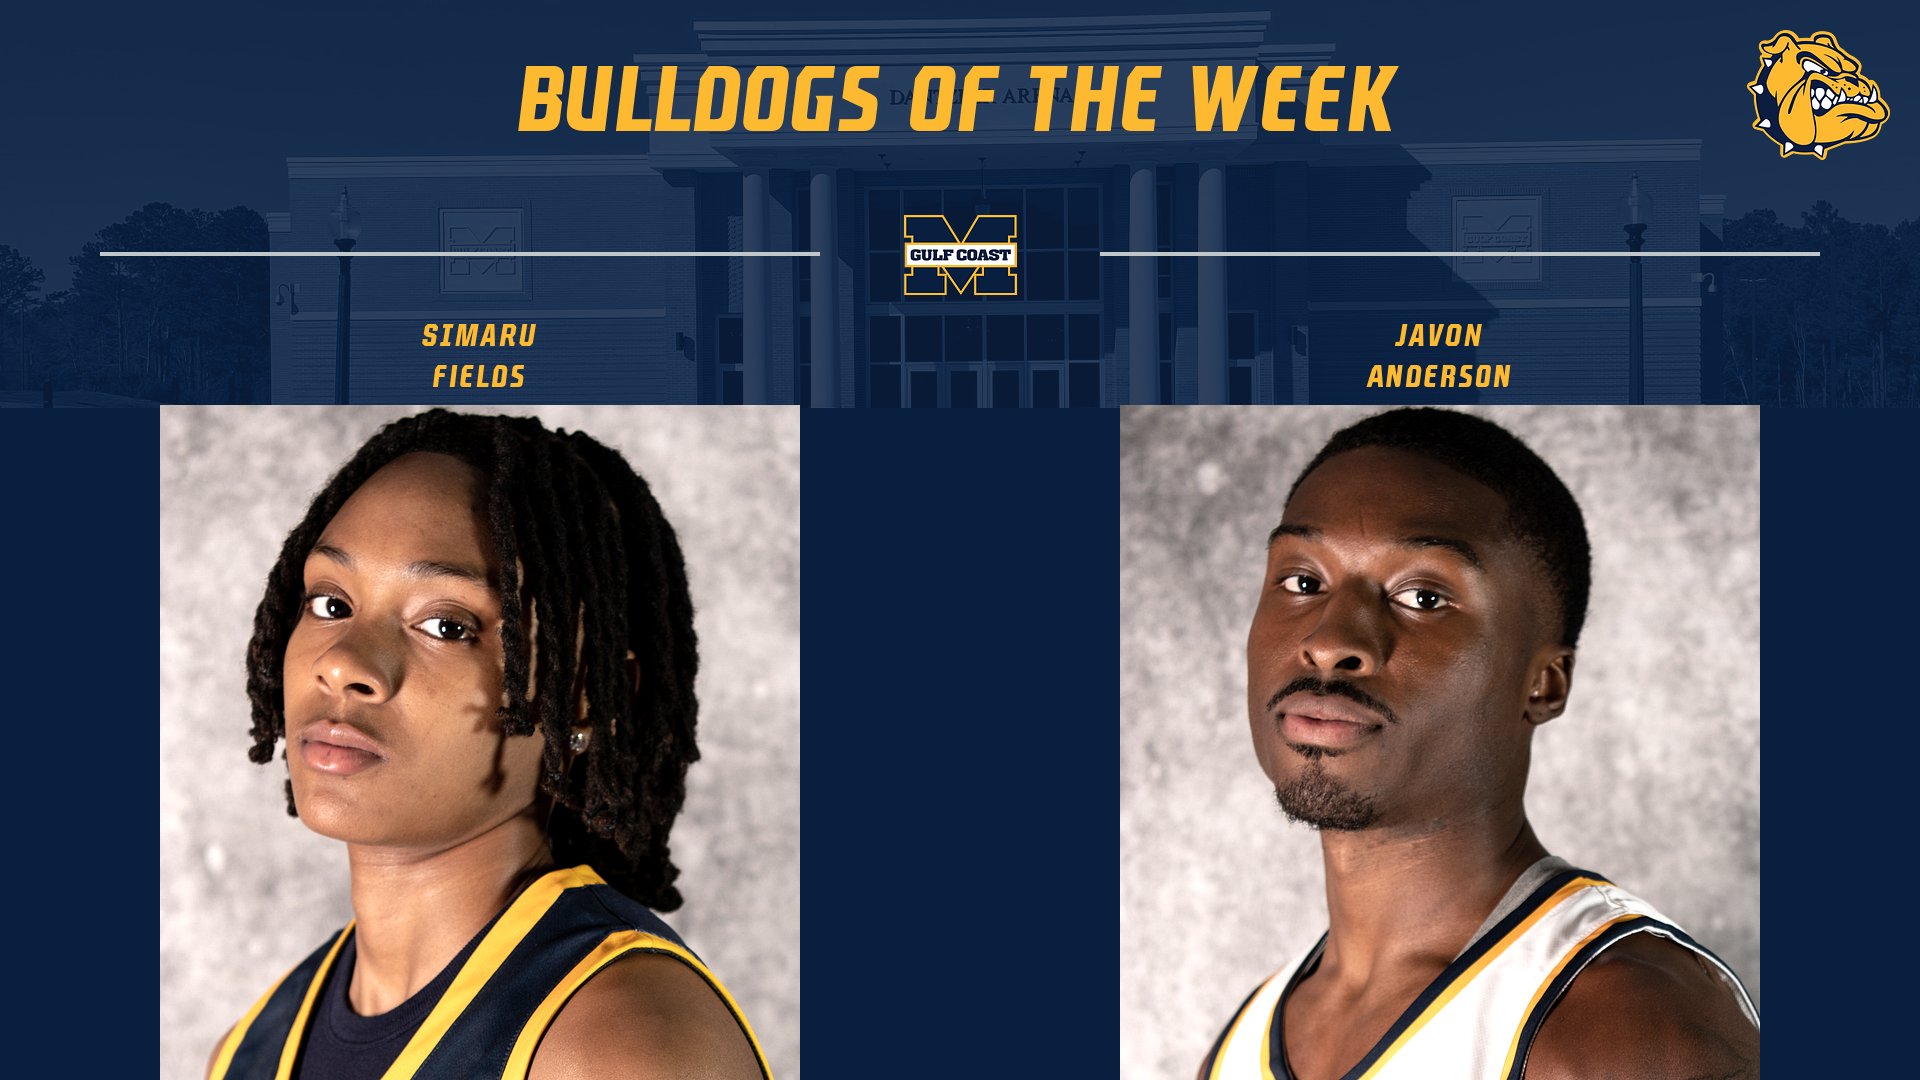 Fields, Anderson named Bulldogs of the Week